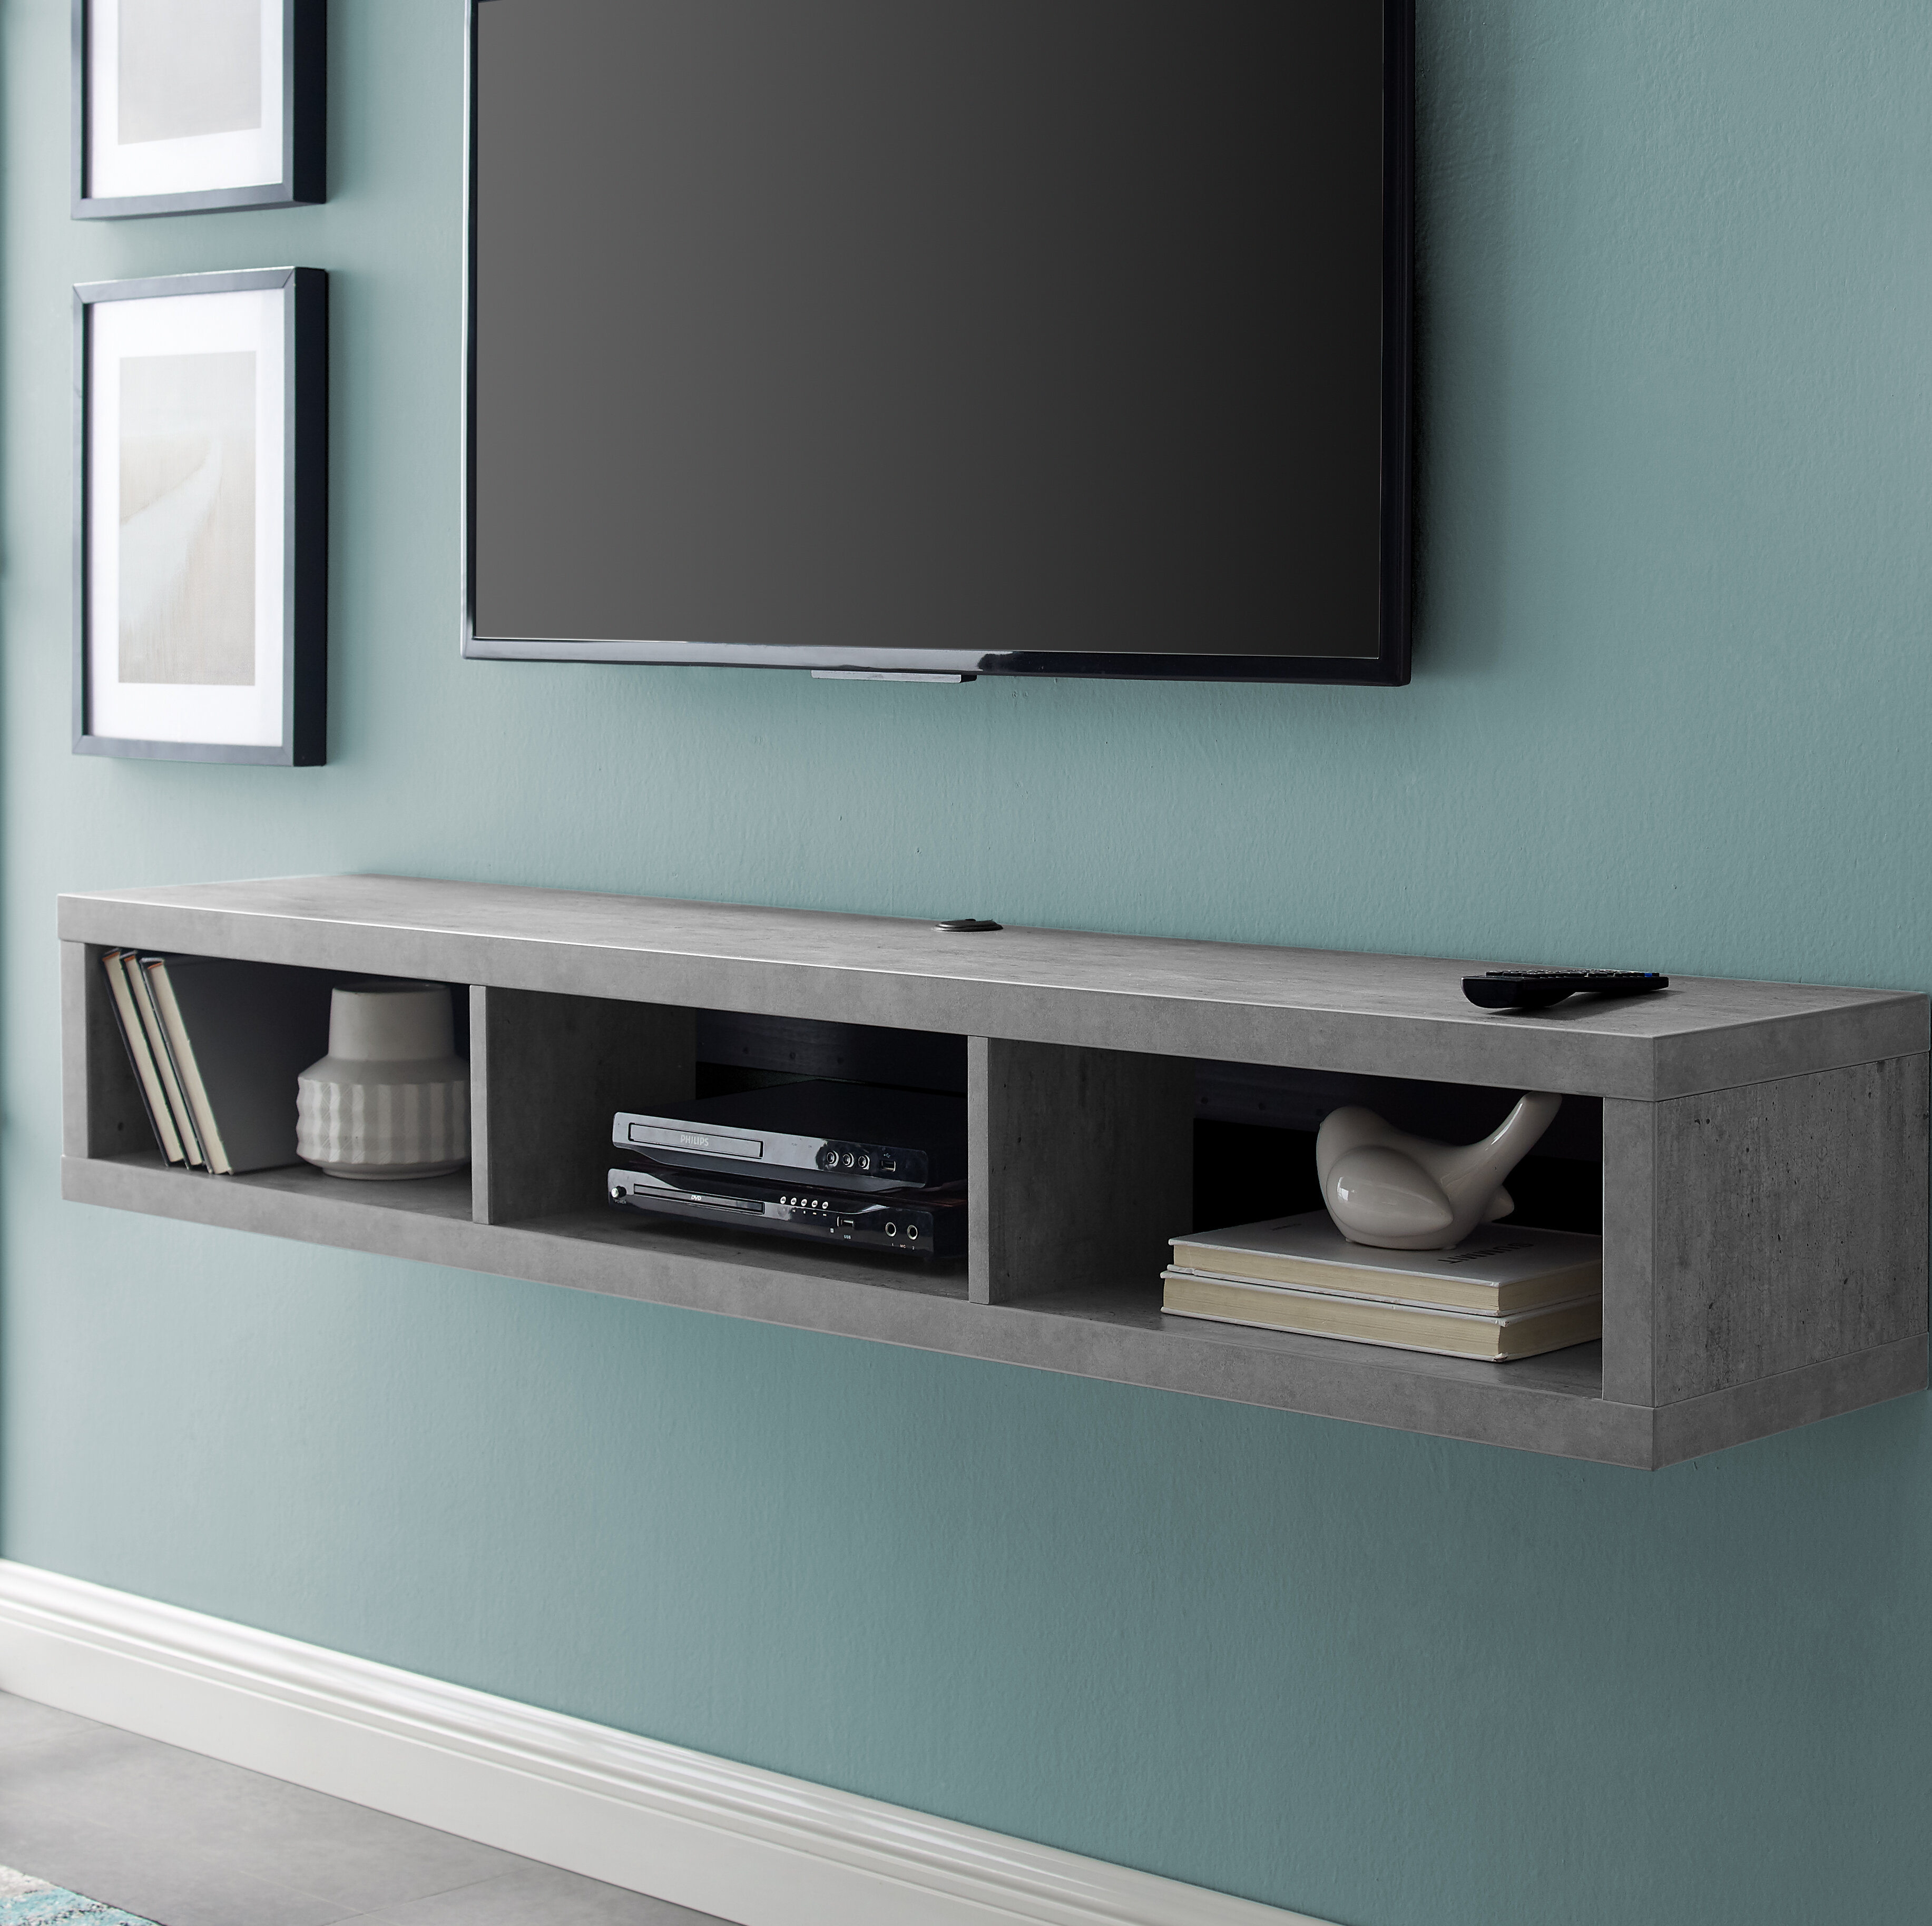 Orren Ellis Maughan Floating Tv Stand For Tvs Up To 78 Reviews